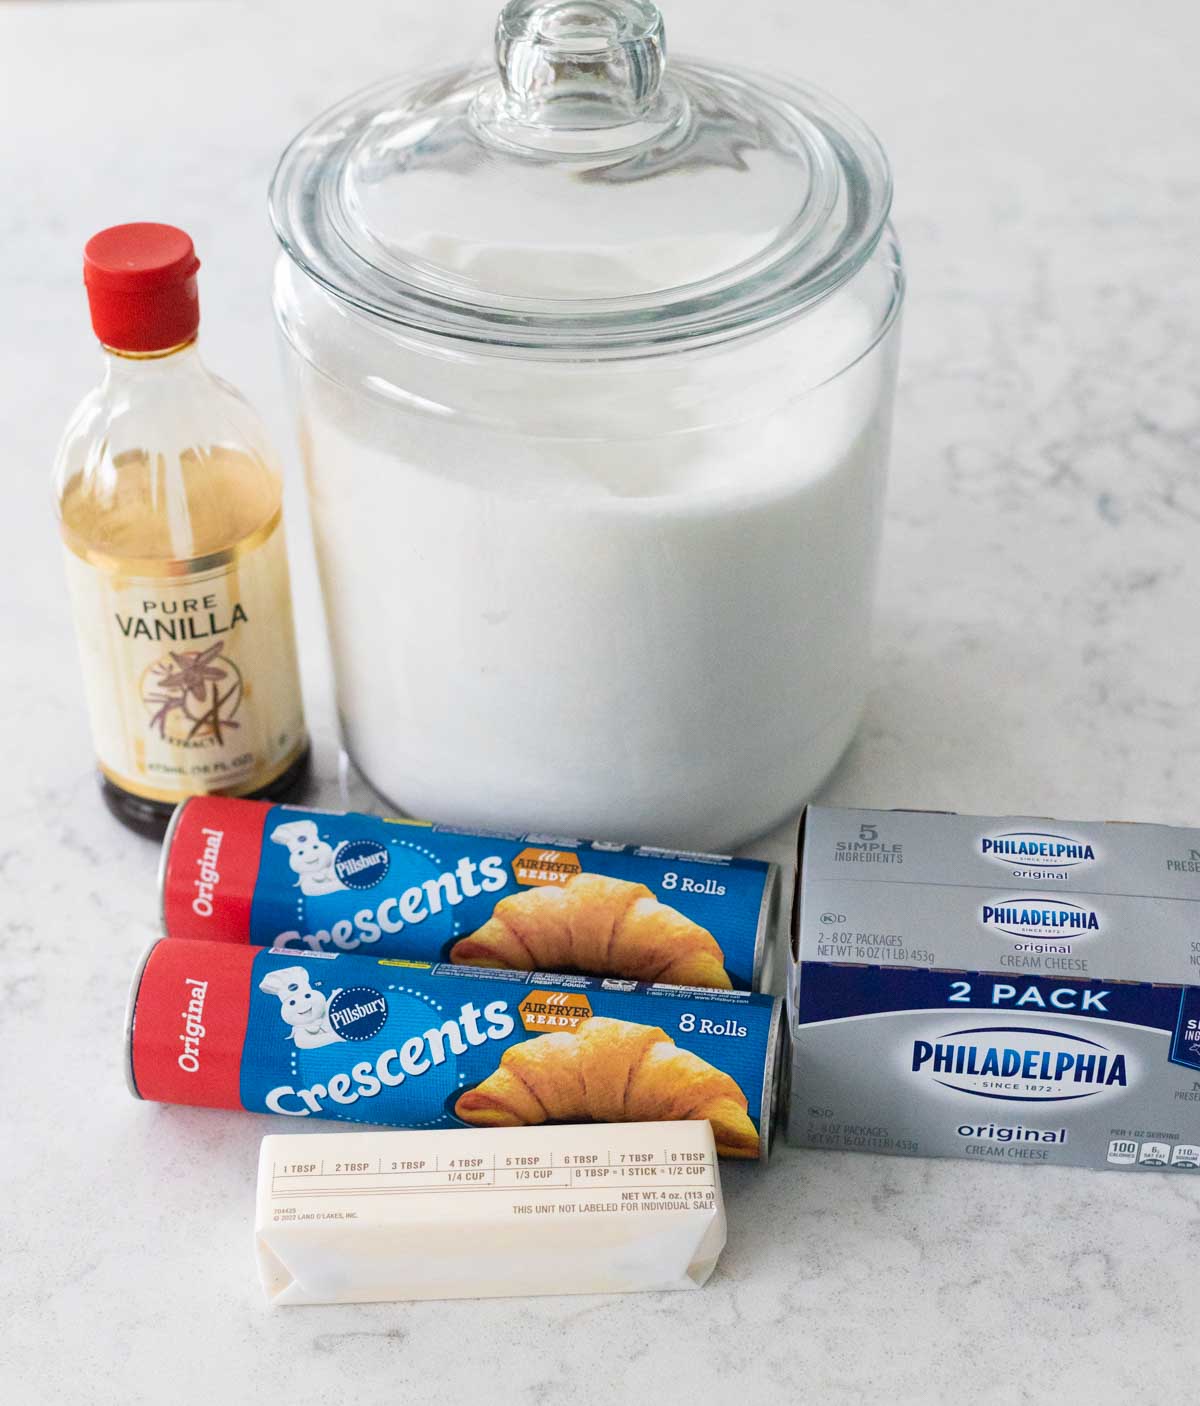 The crescent roll dough and cream cheese are on the counter next to the rest of the ingredients to make the dessert.